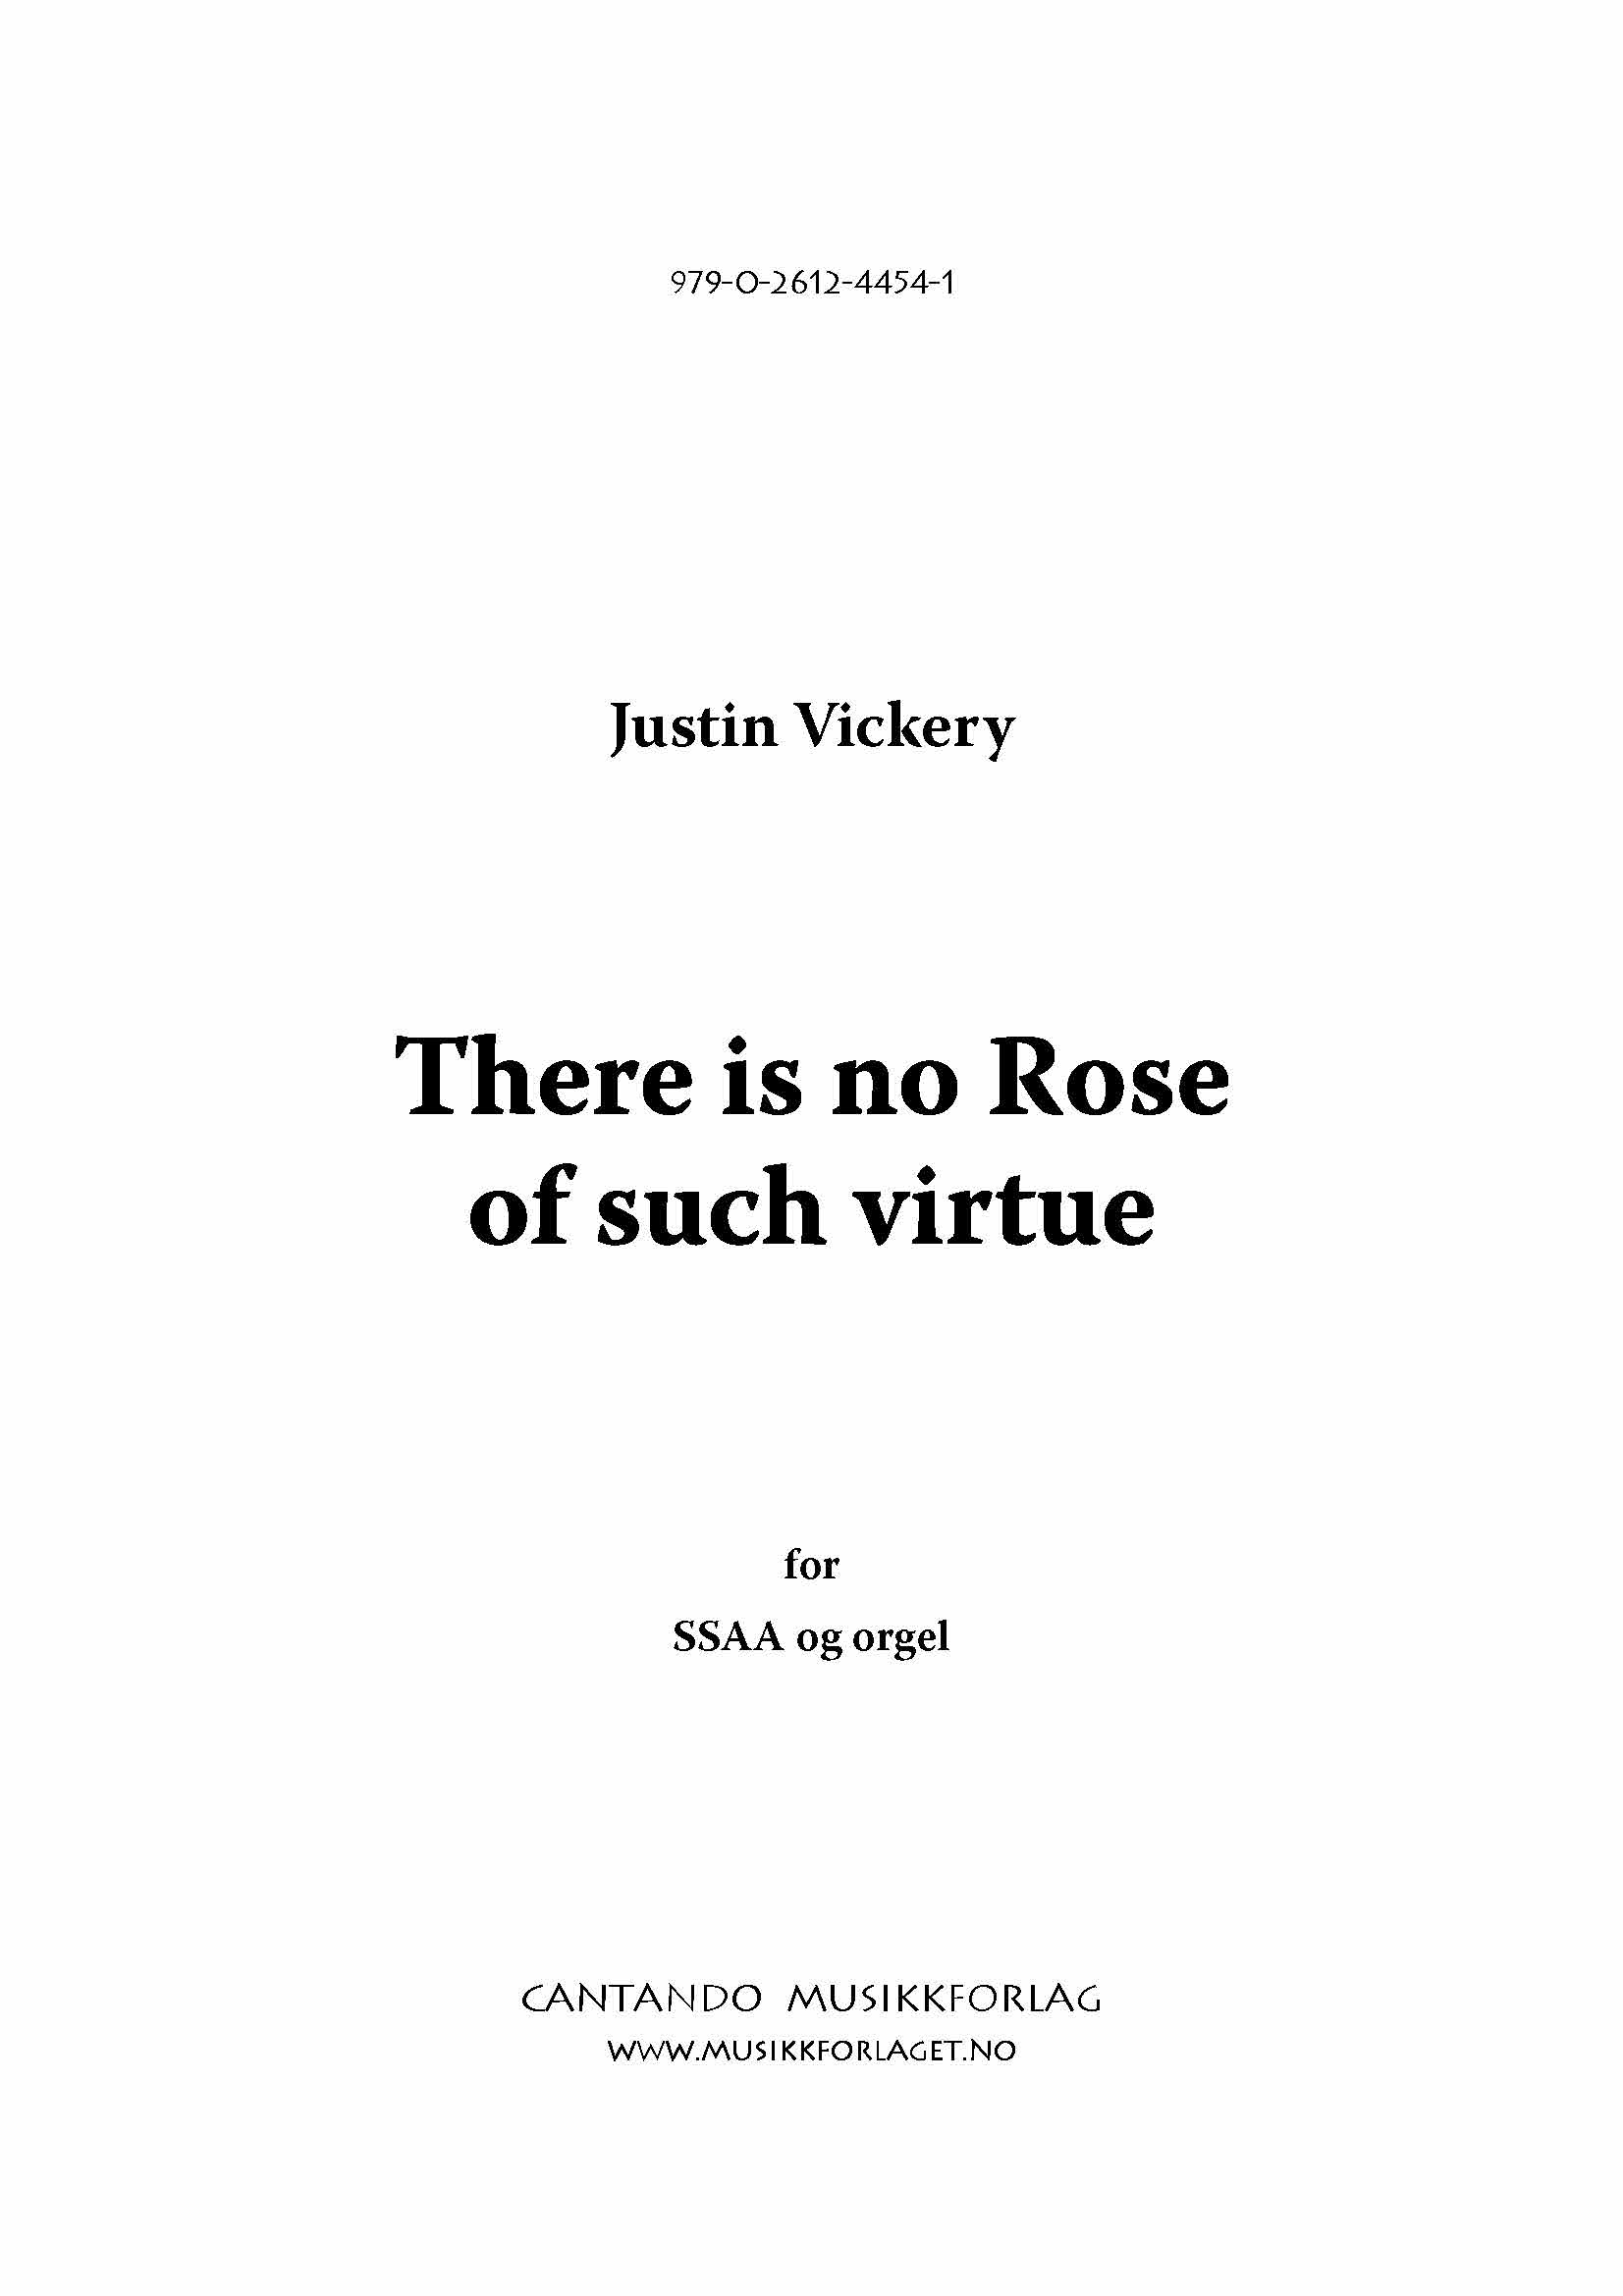 There is no Rose of such virtue (SSA/orgel)